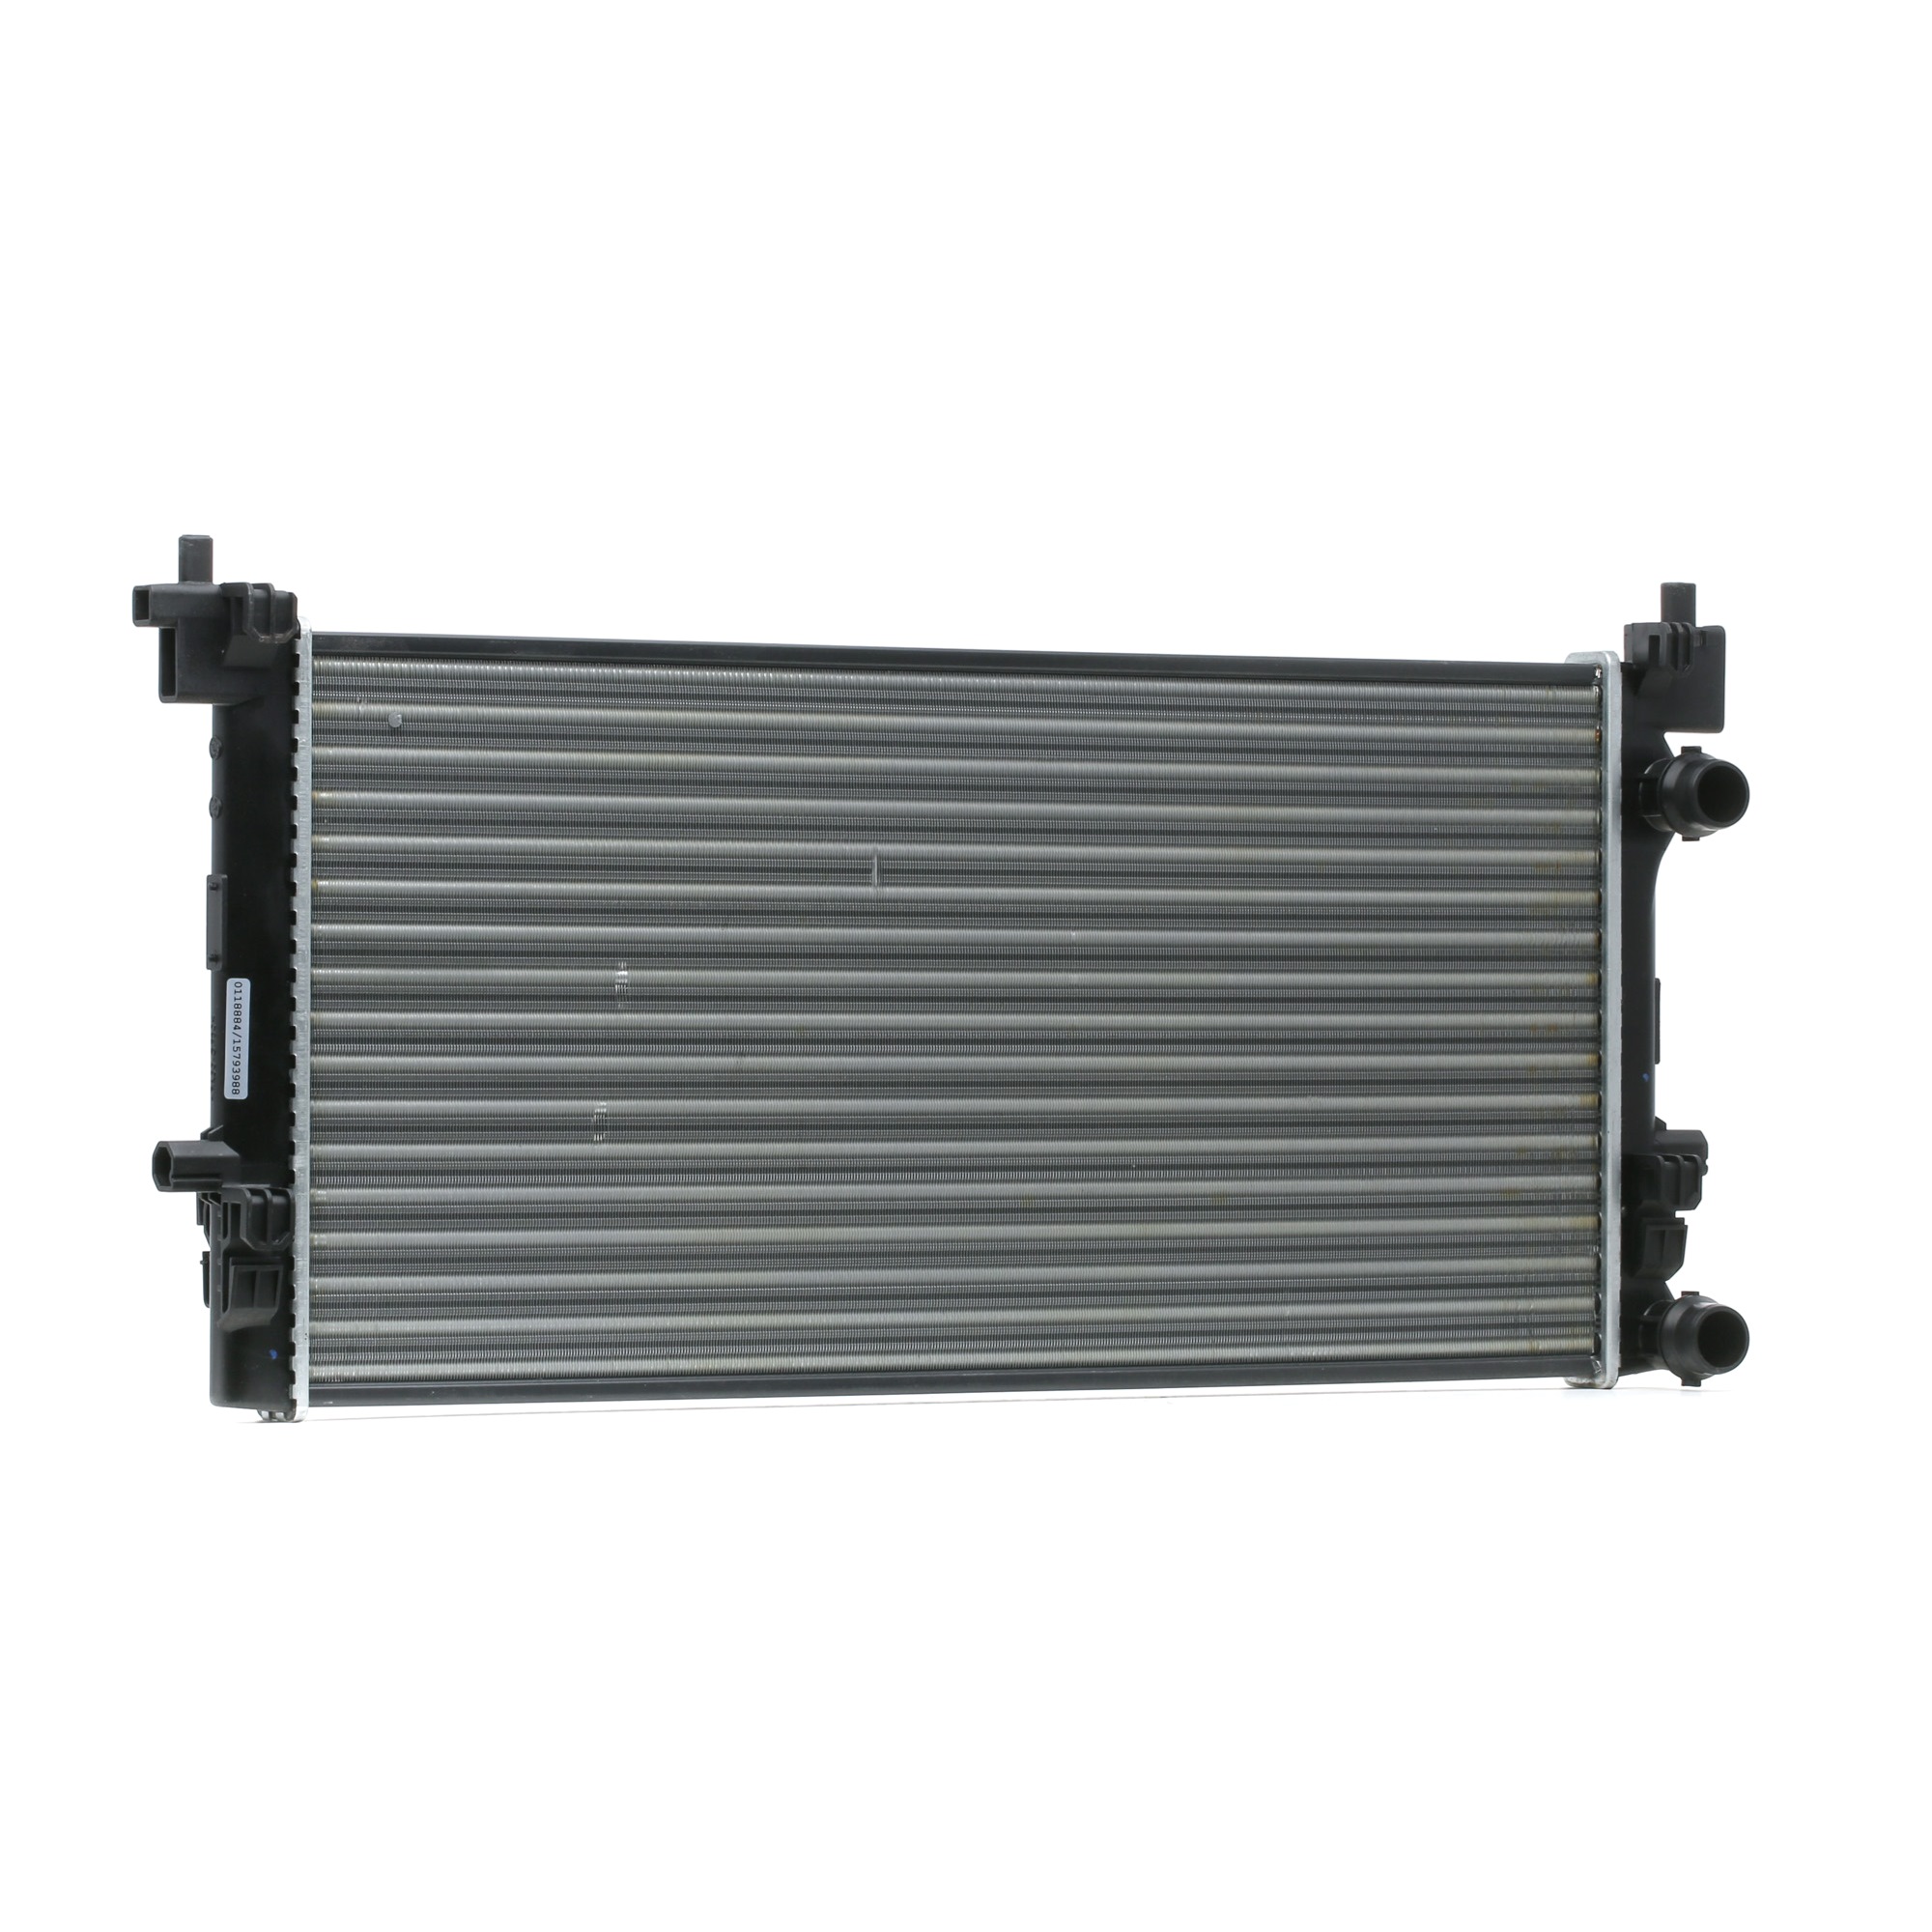 STARK SKRD-0121103 Engine radiator Aluminium, with accessories, Mechanically jointed cooling fins